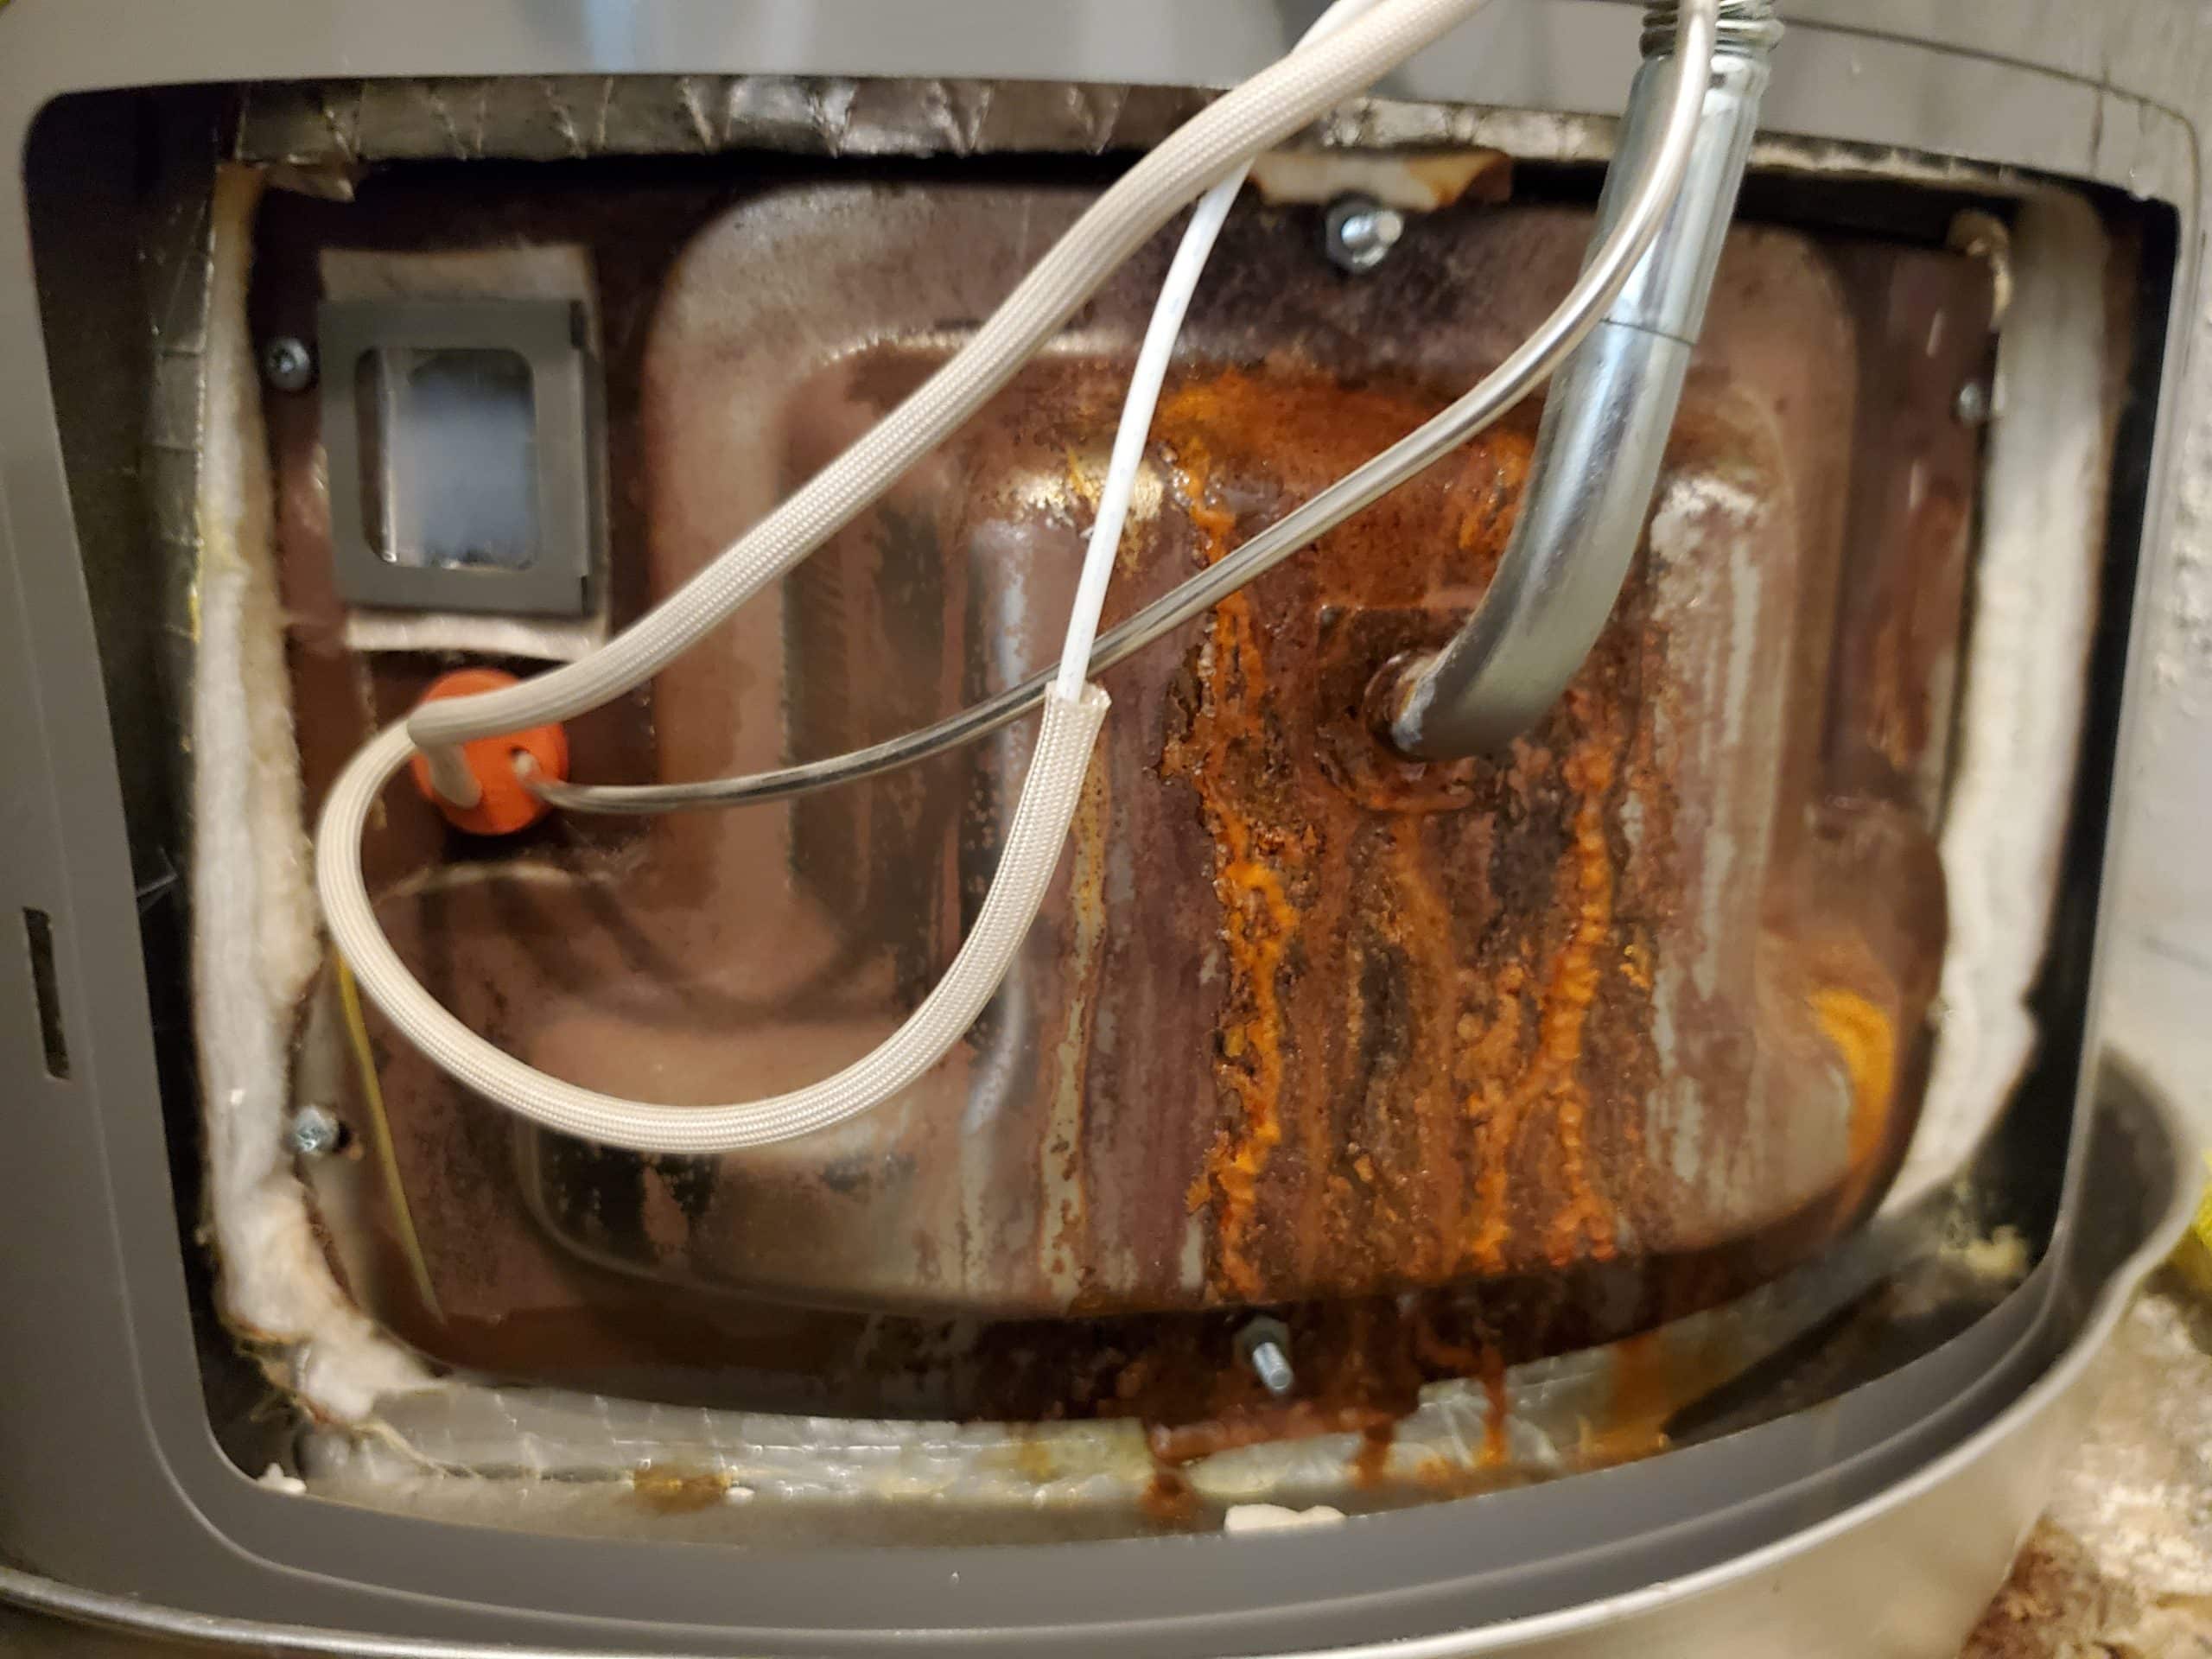 Rusty water heater parts.